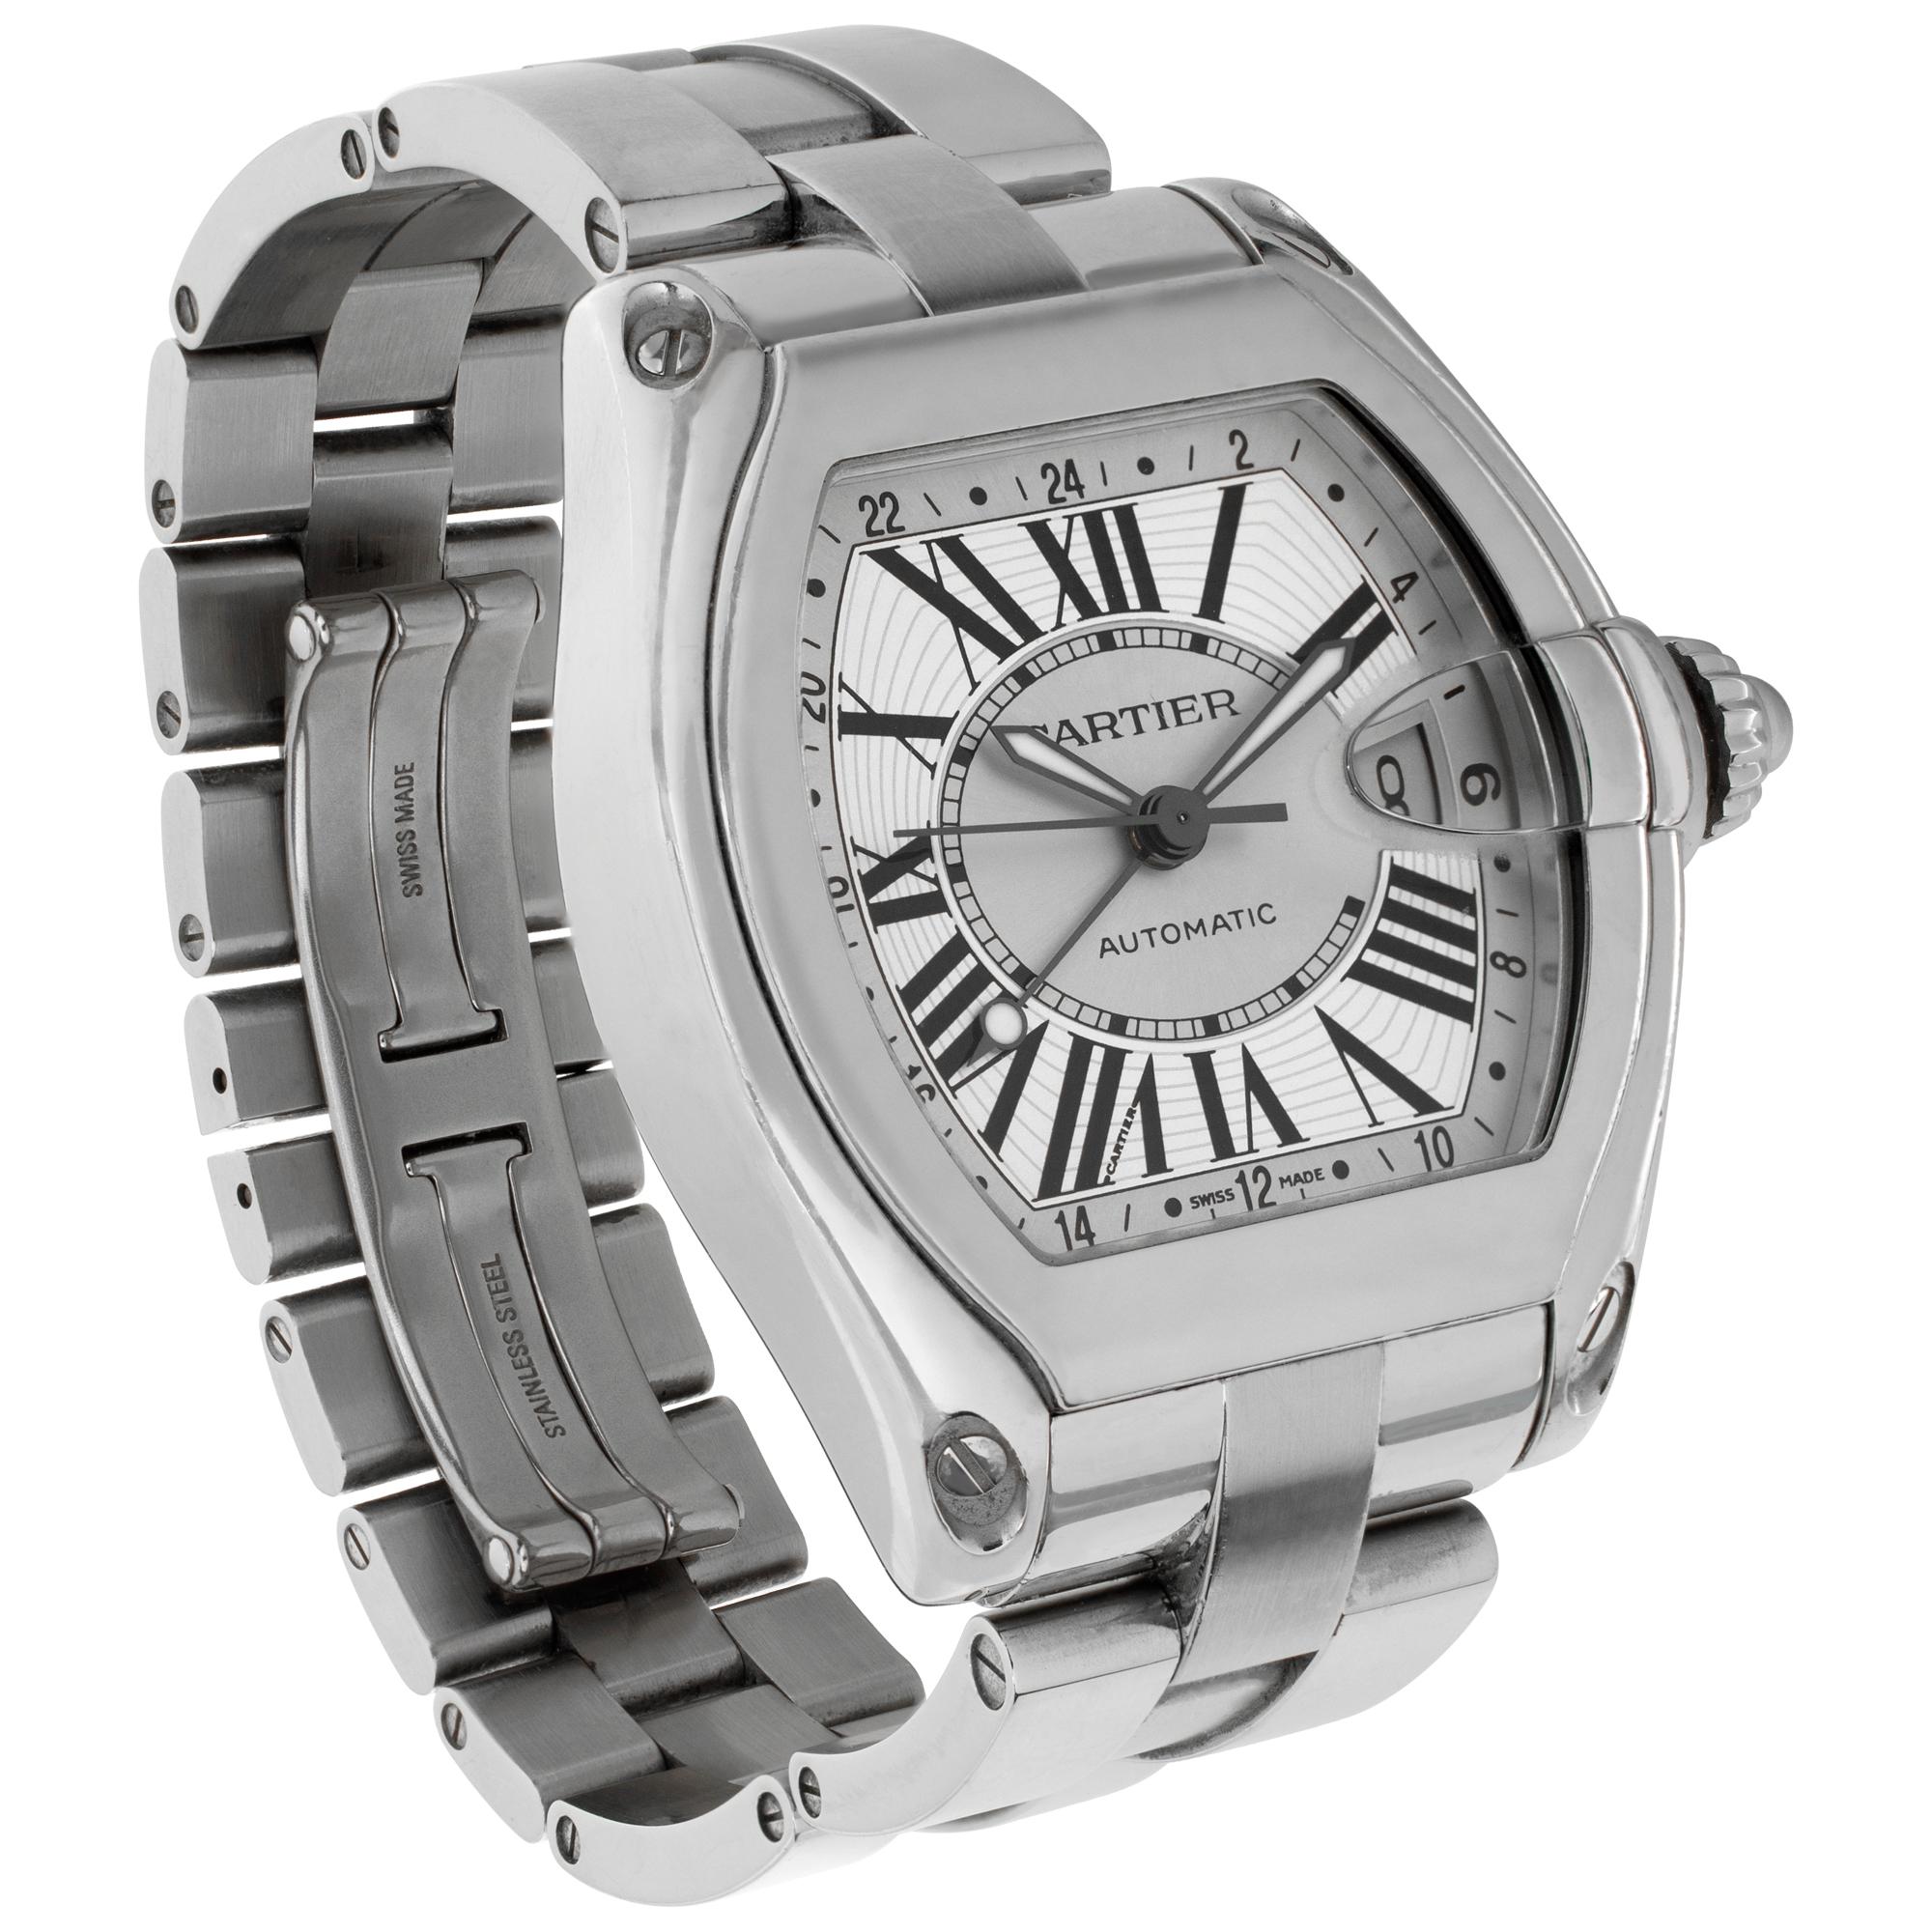 Cartier Roadster stainless steel Automatic Wristwatch Ref W62032X6 In Excellent Condition For Sale In Surfside, FL